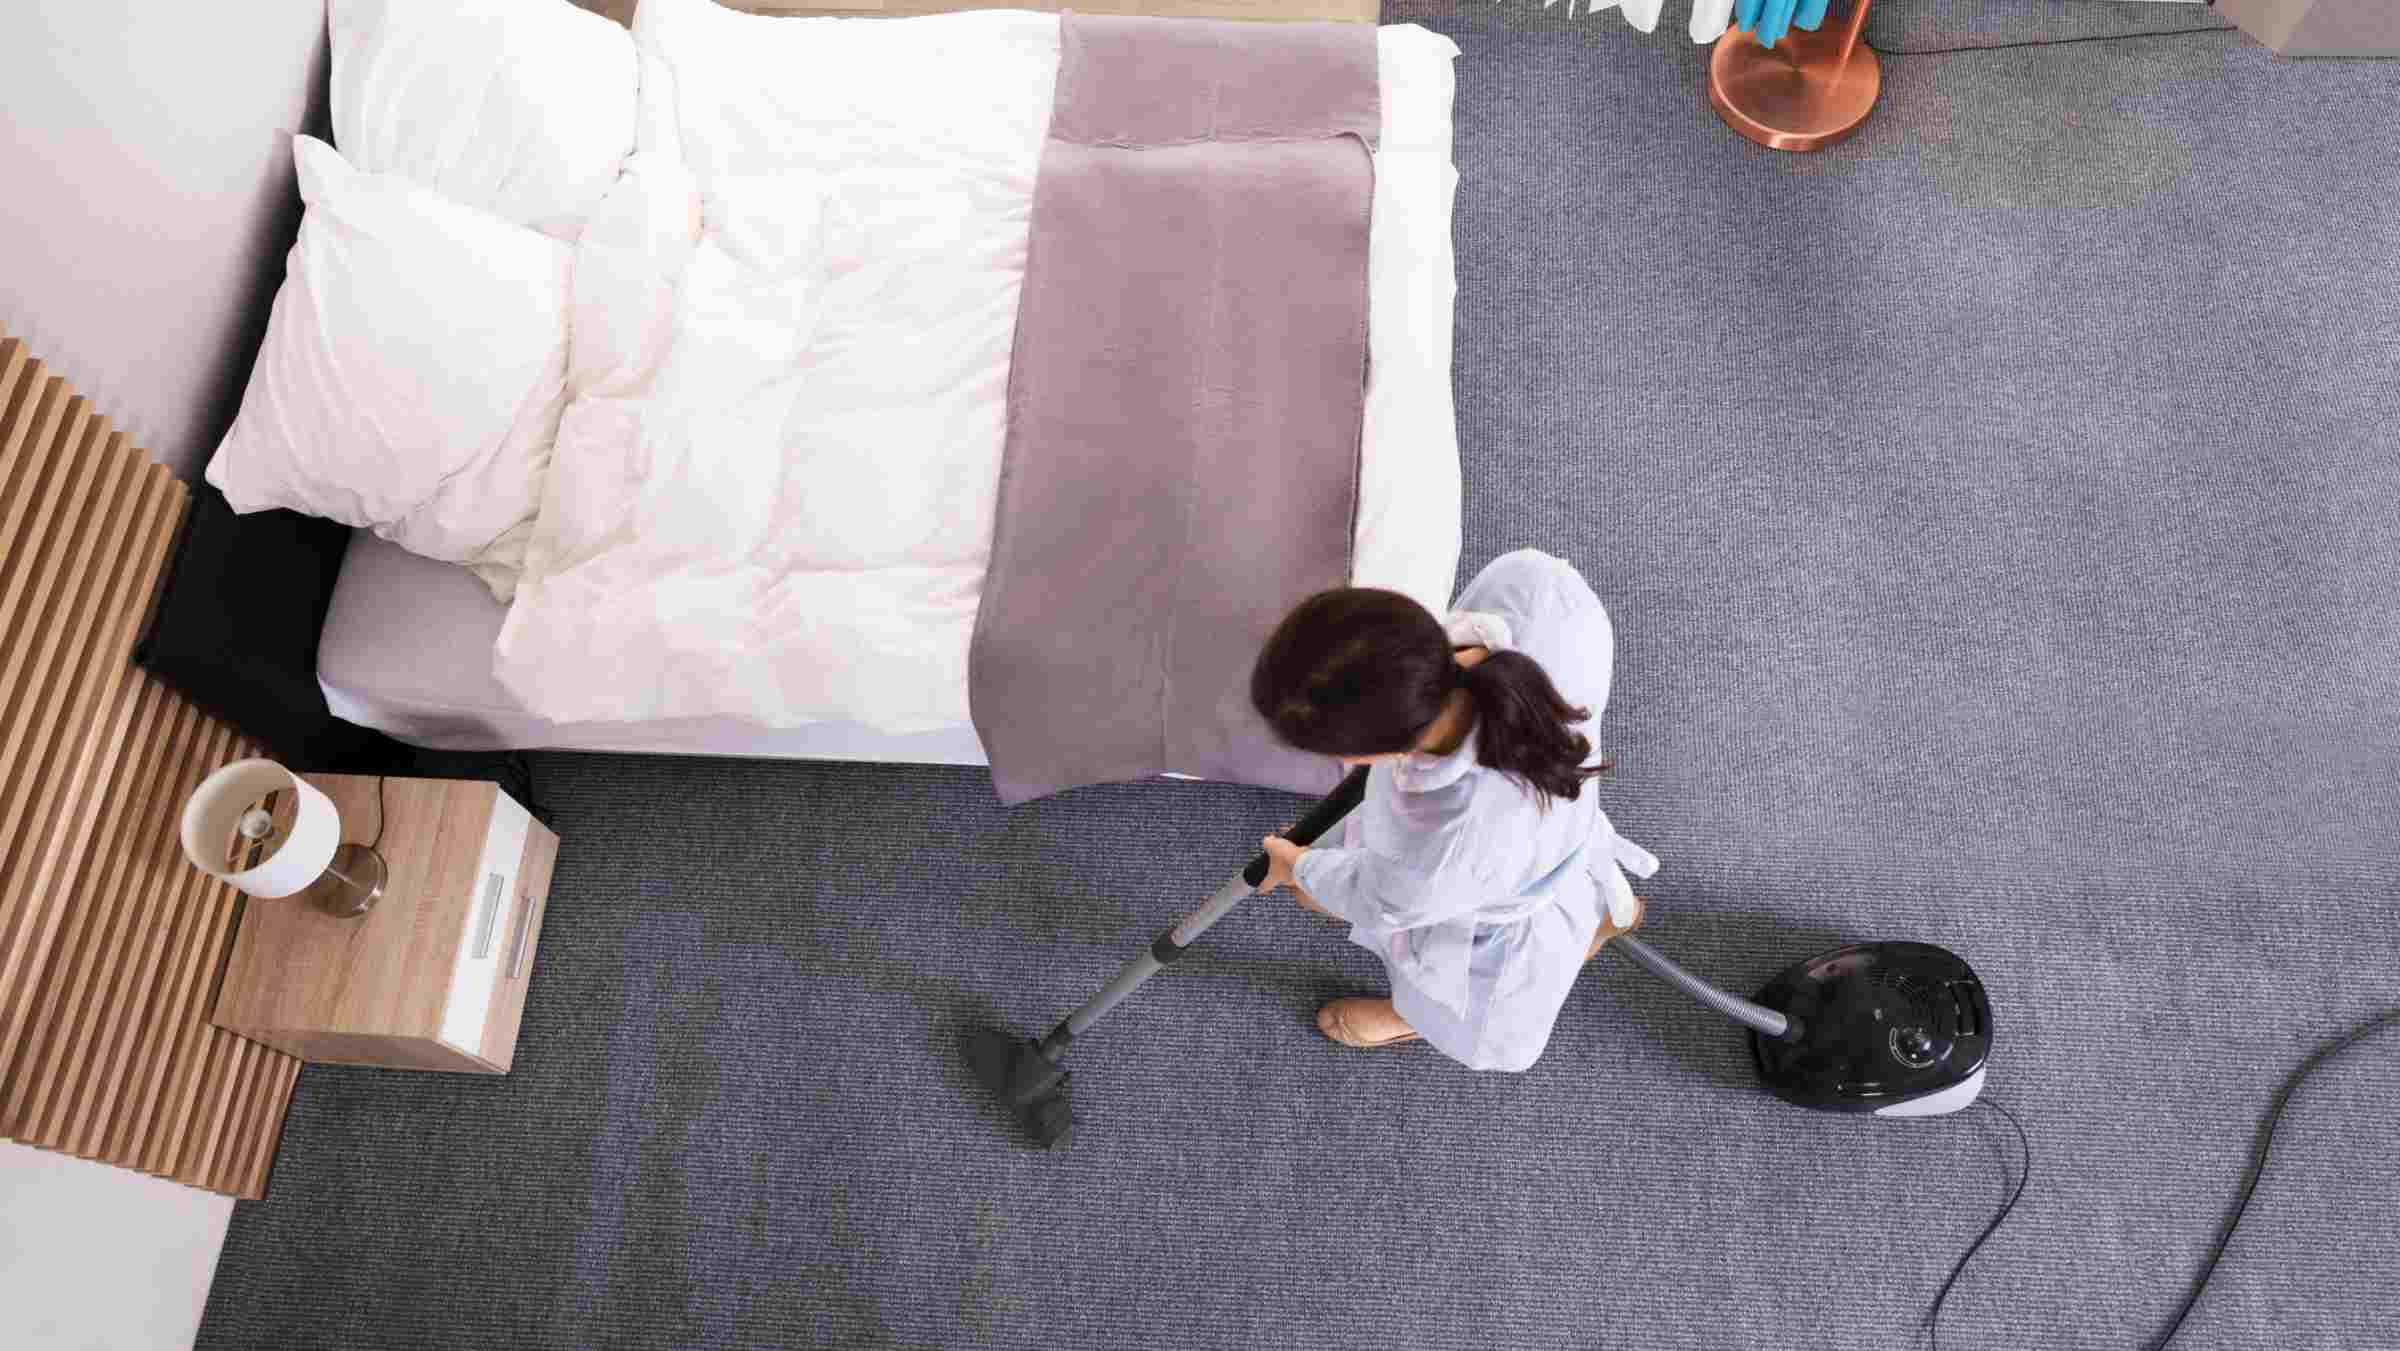 What factors affect the cost of cleaning a house